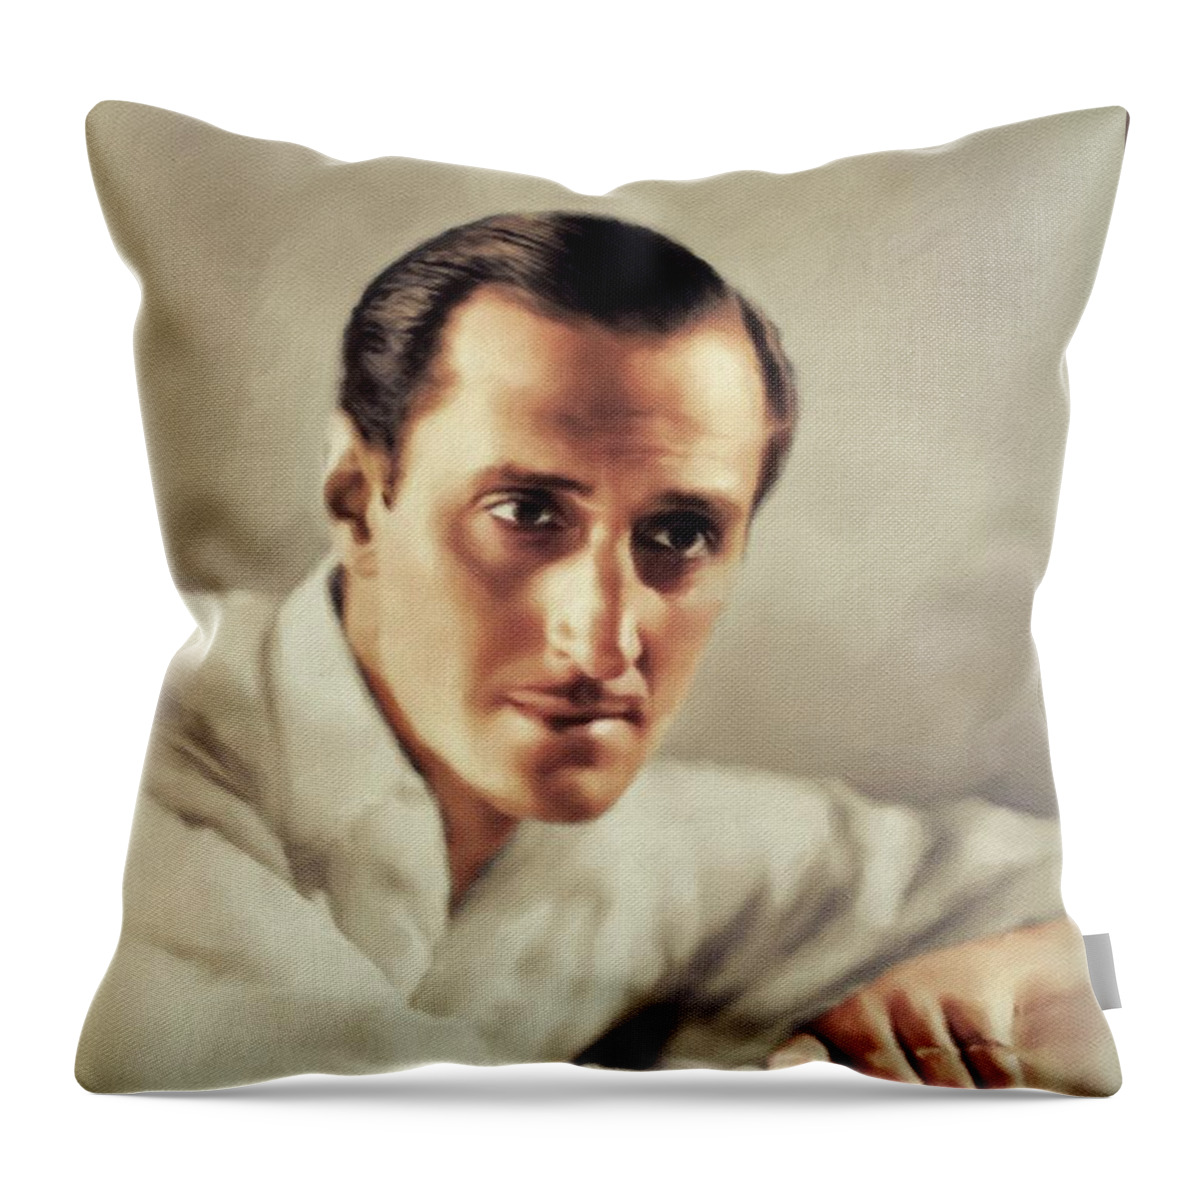 Basil Throw Pillow featuring the painting Basil Rathbone, Vintage Actor #4 by Esoterica Art Agency